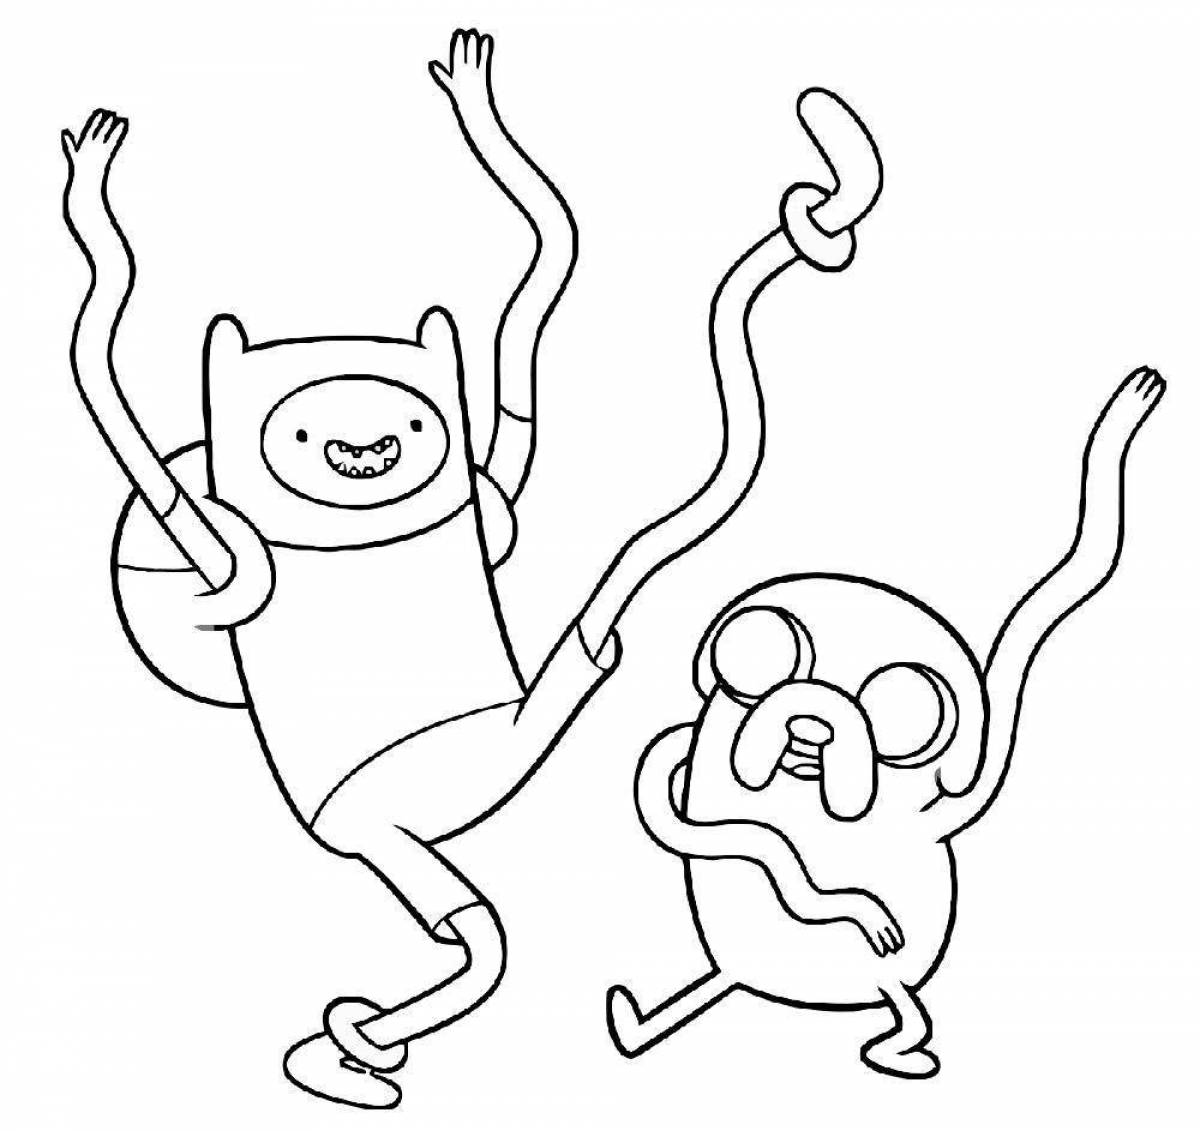 Fin and jake coloring page